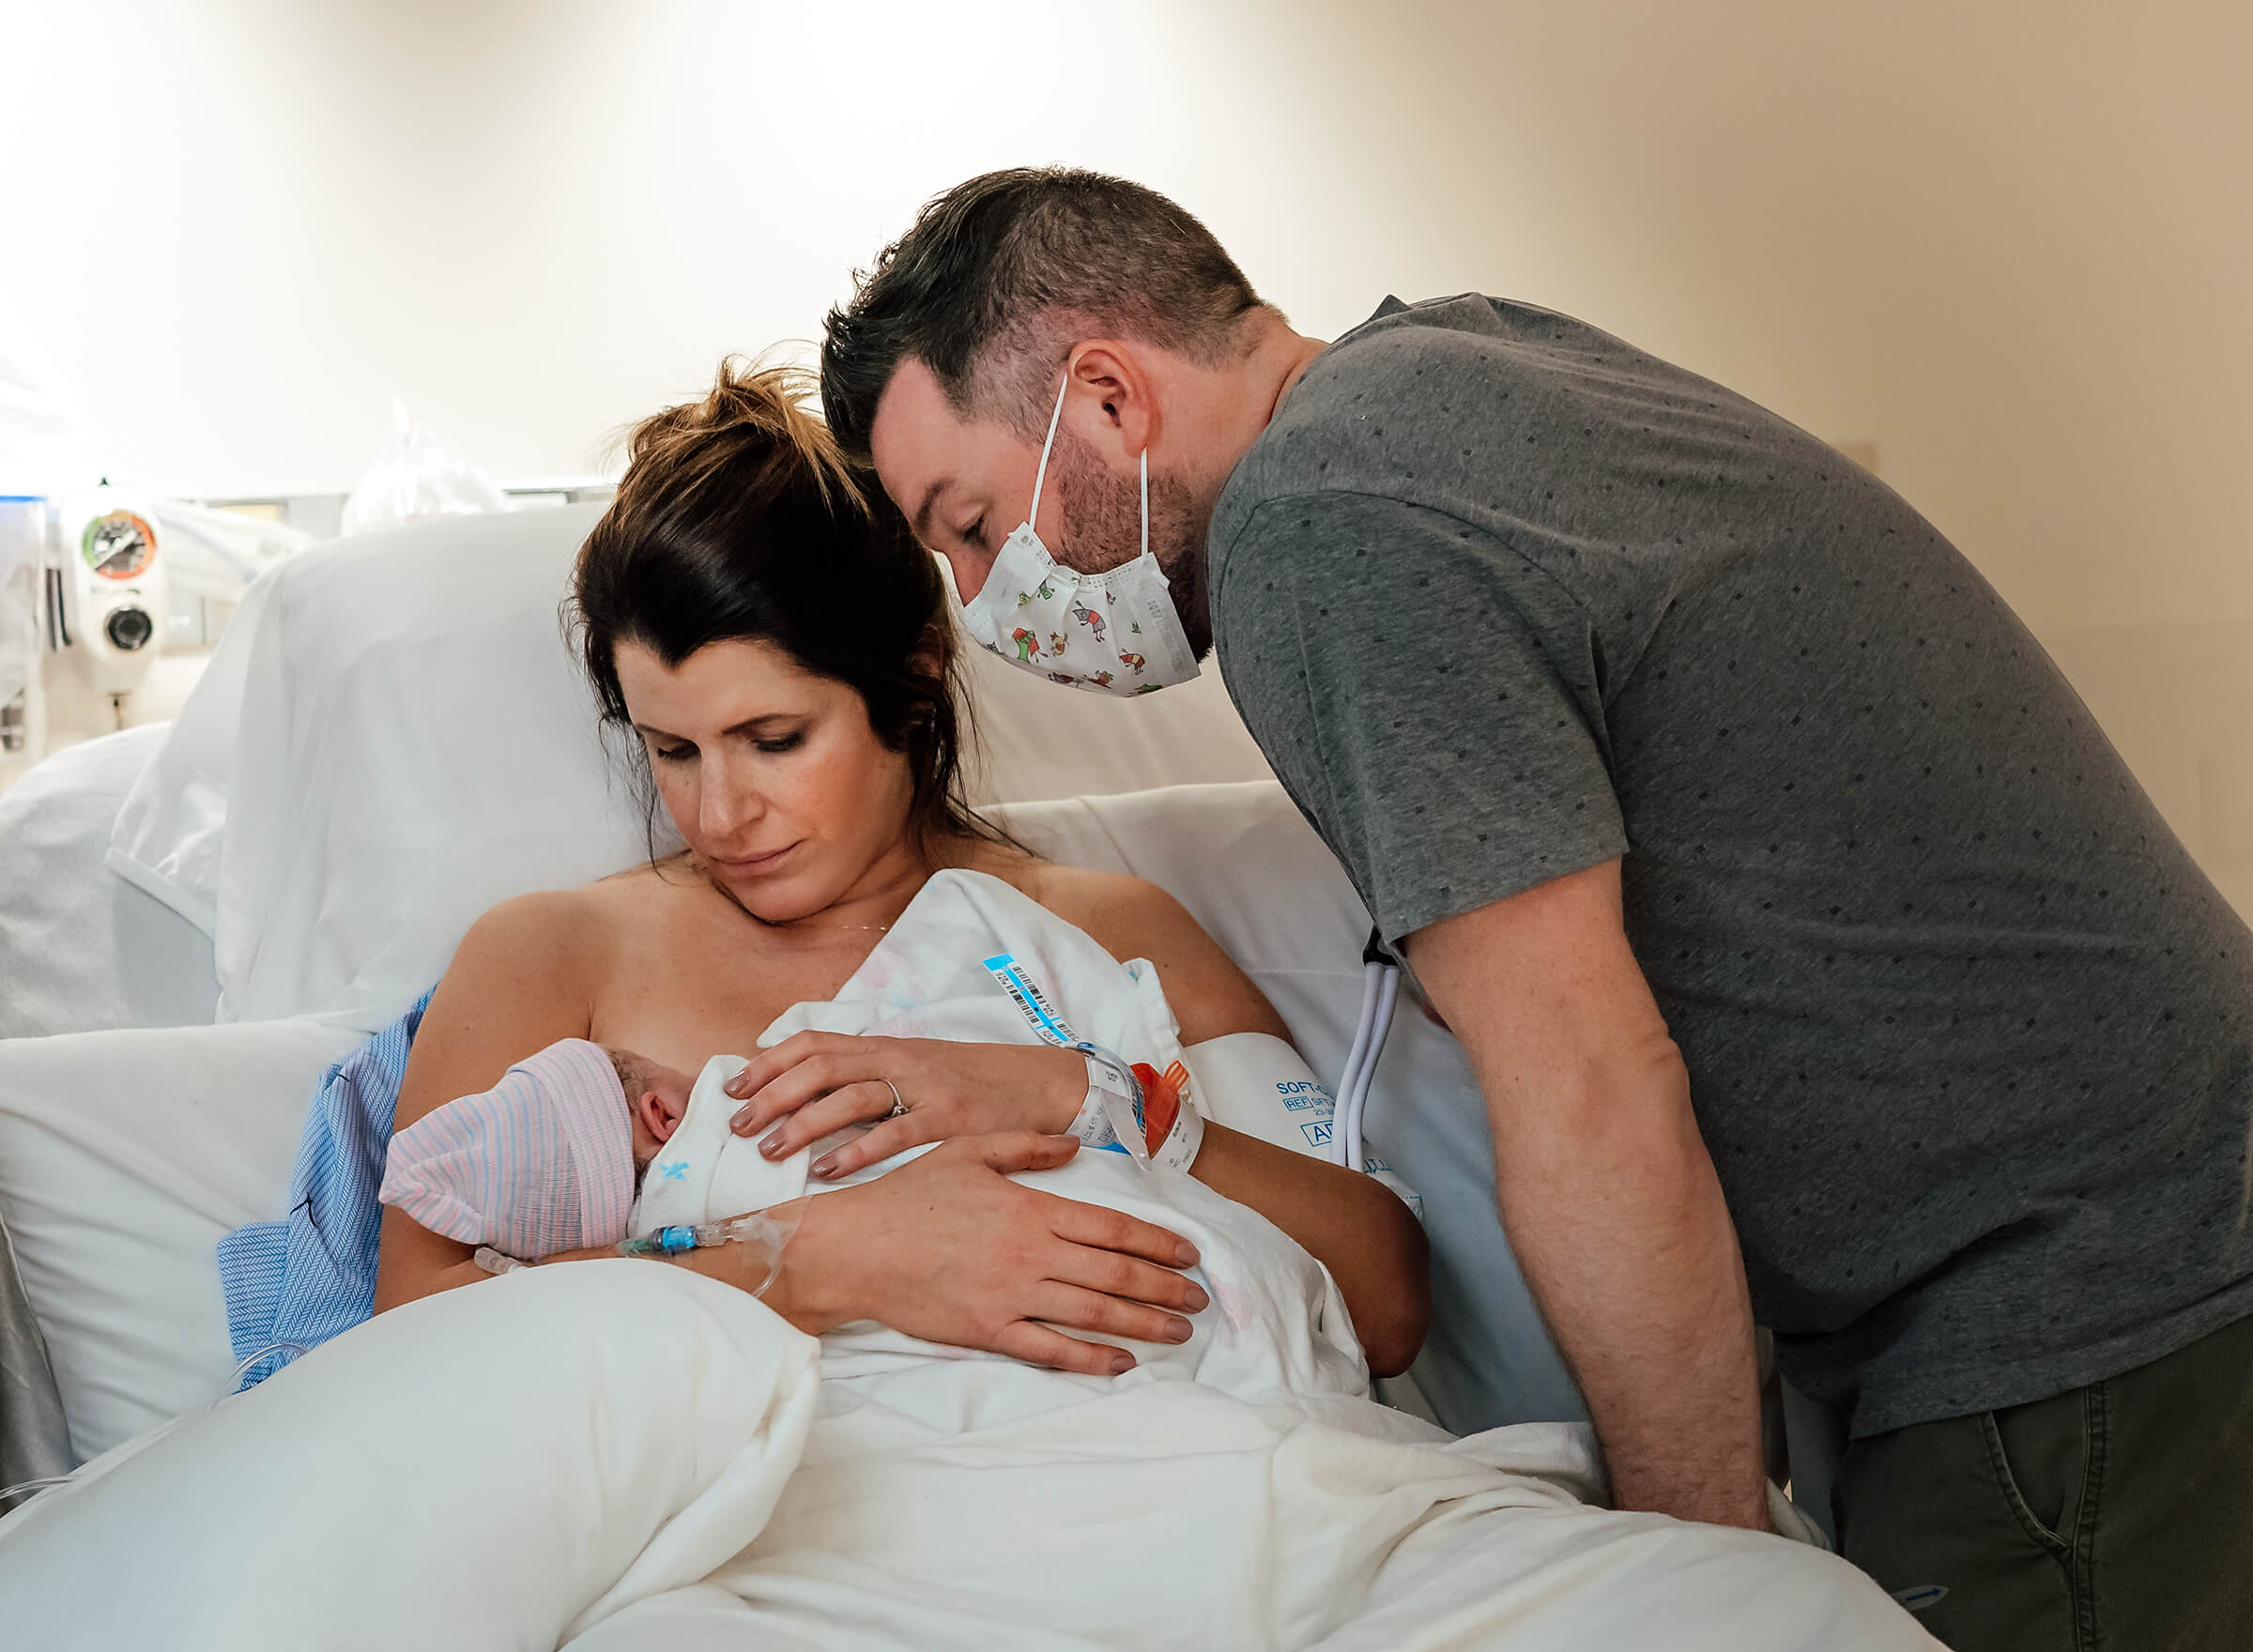 parents meeting their baby for the first time after delivery